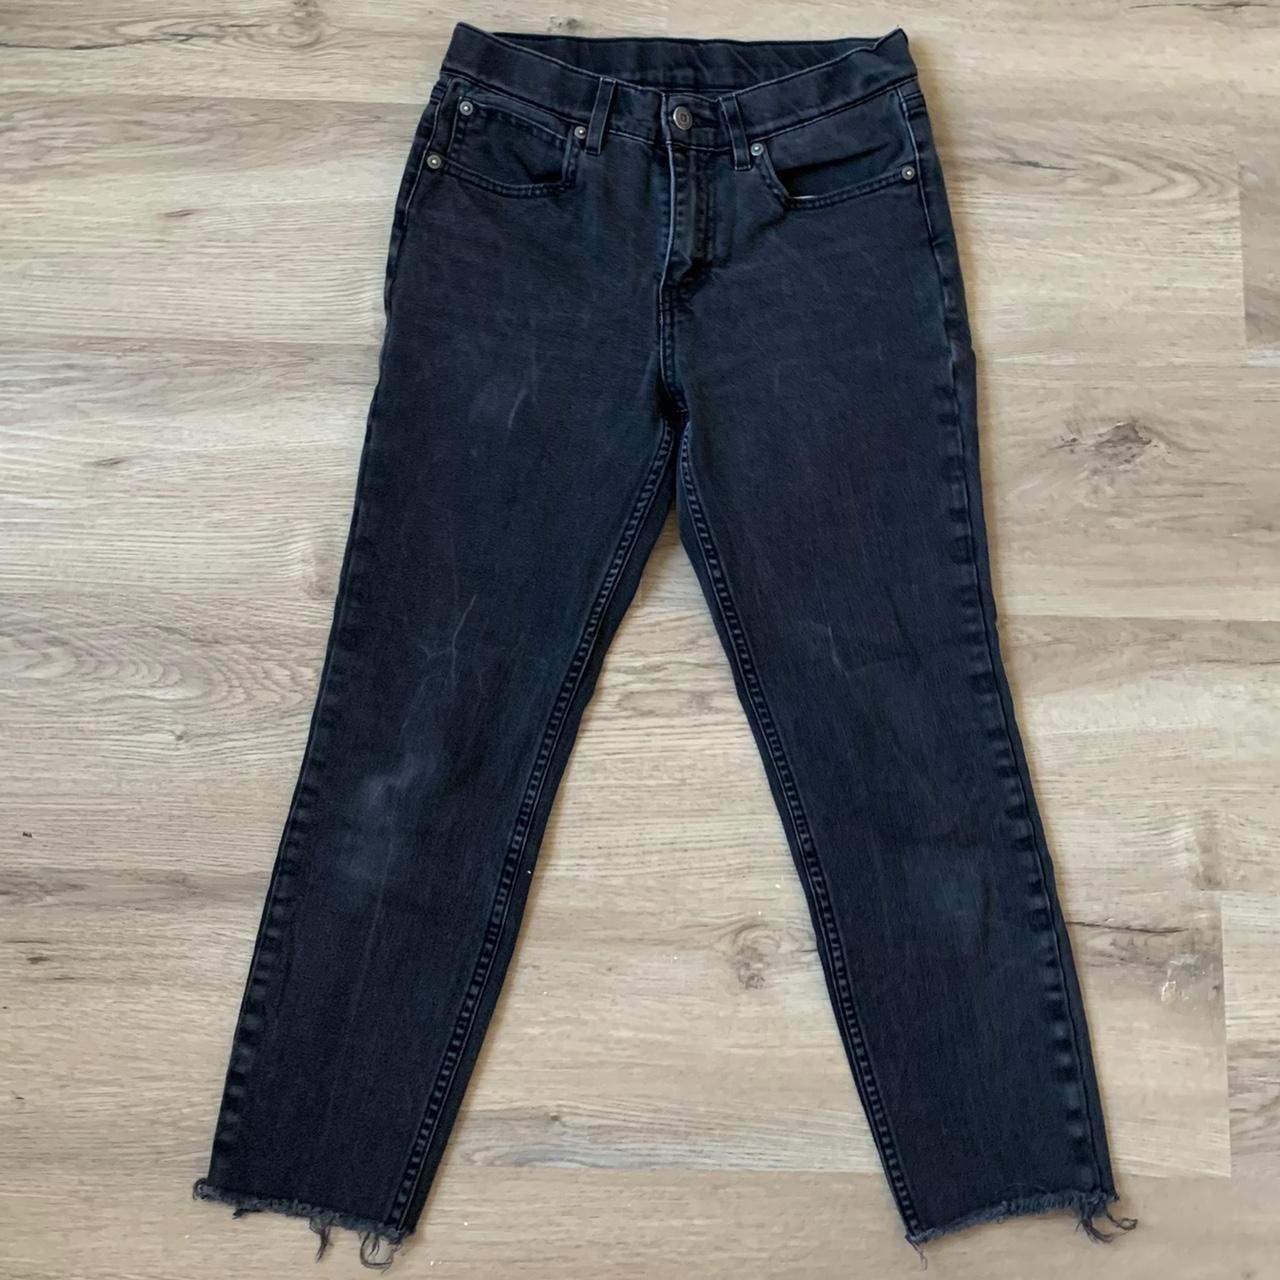 🖤Levi’s Straight High Rise Distressed Wedgie... - Depop